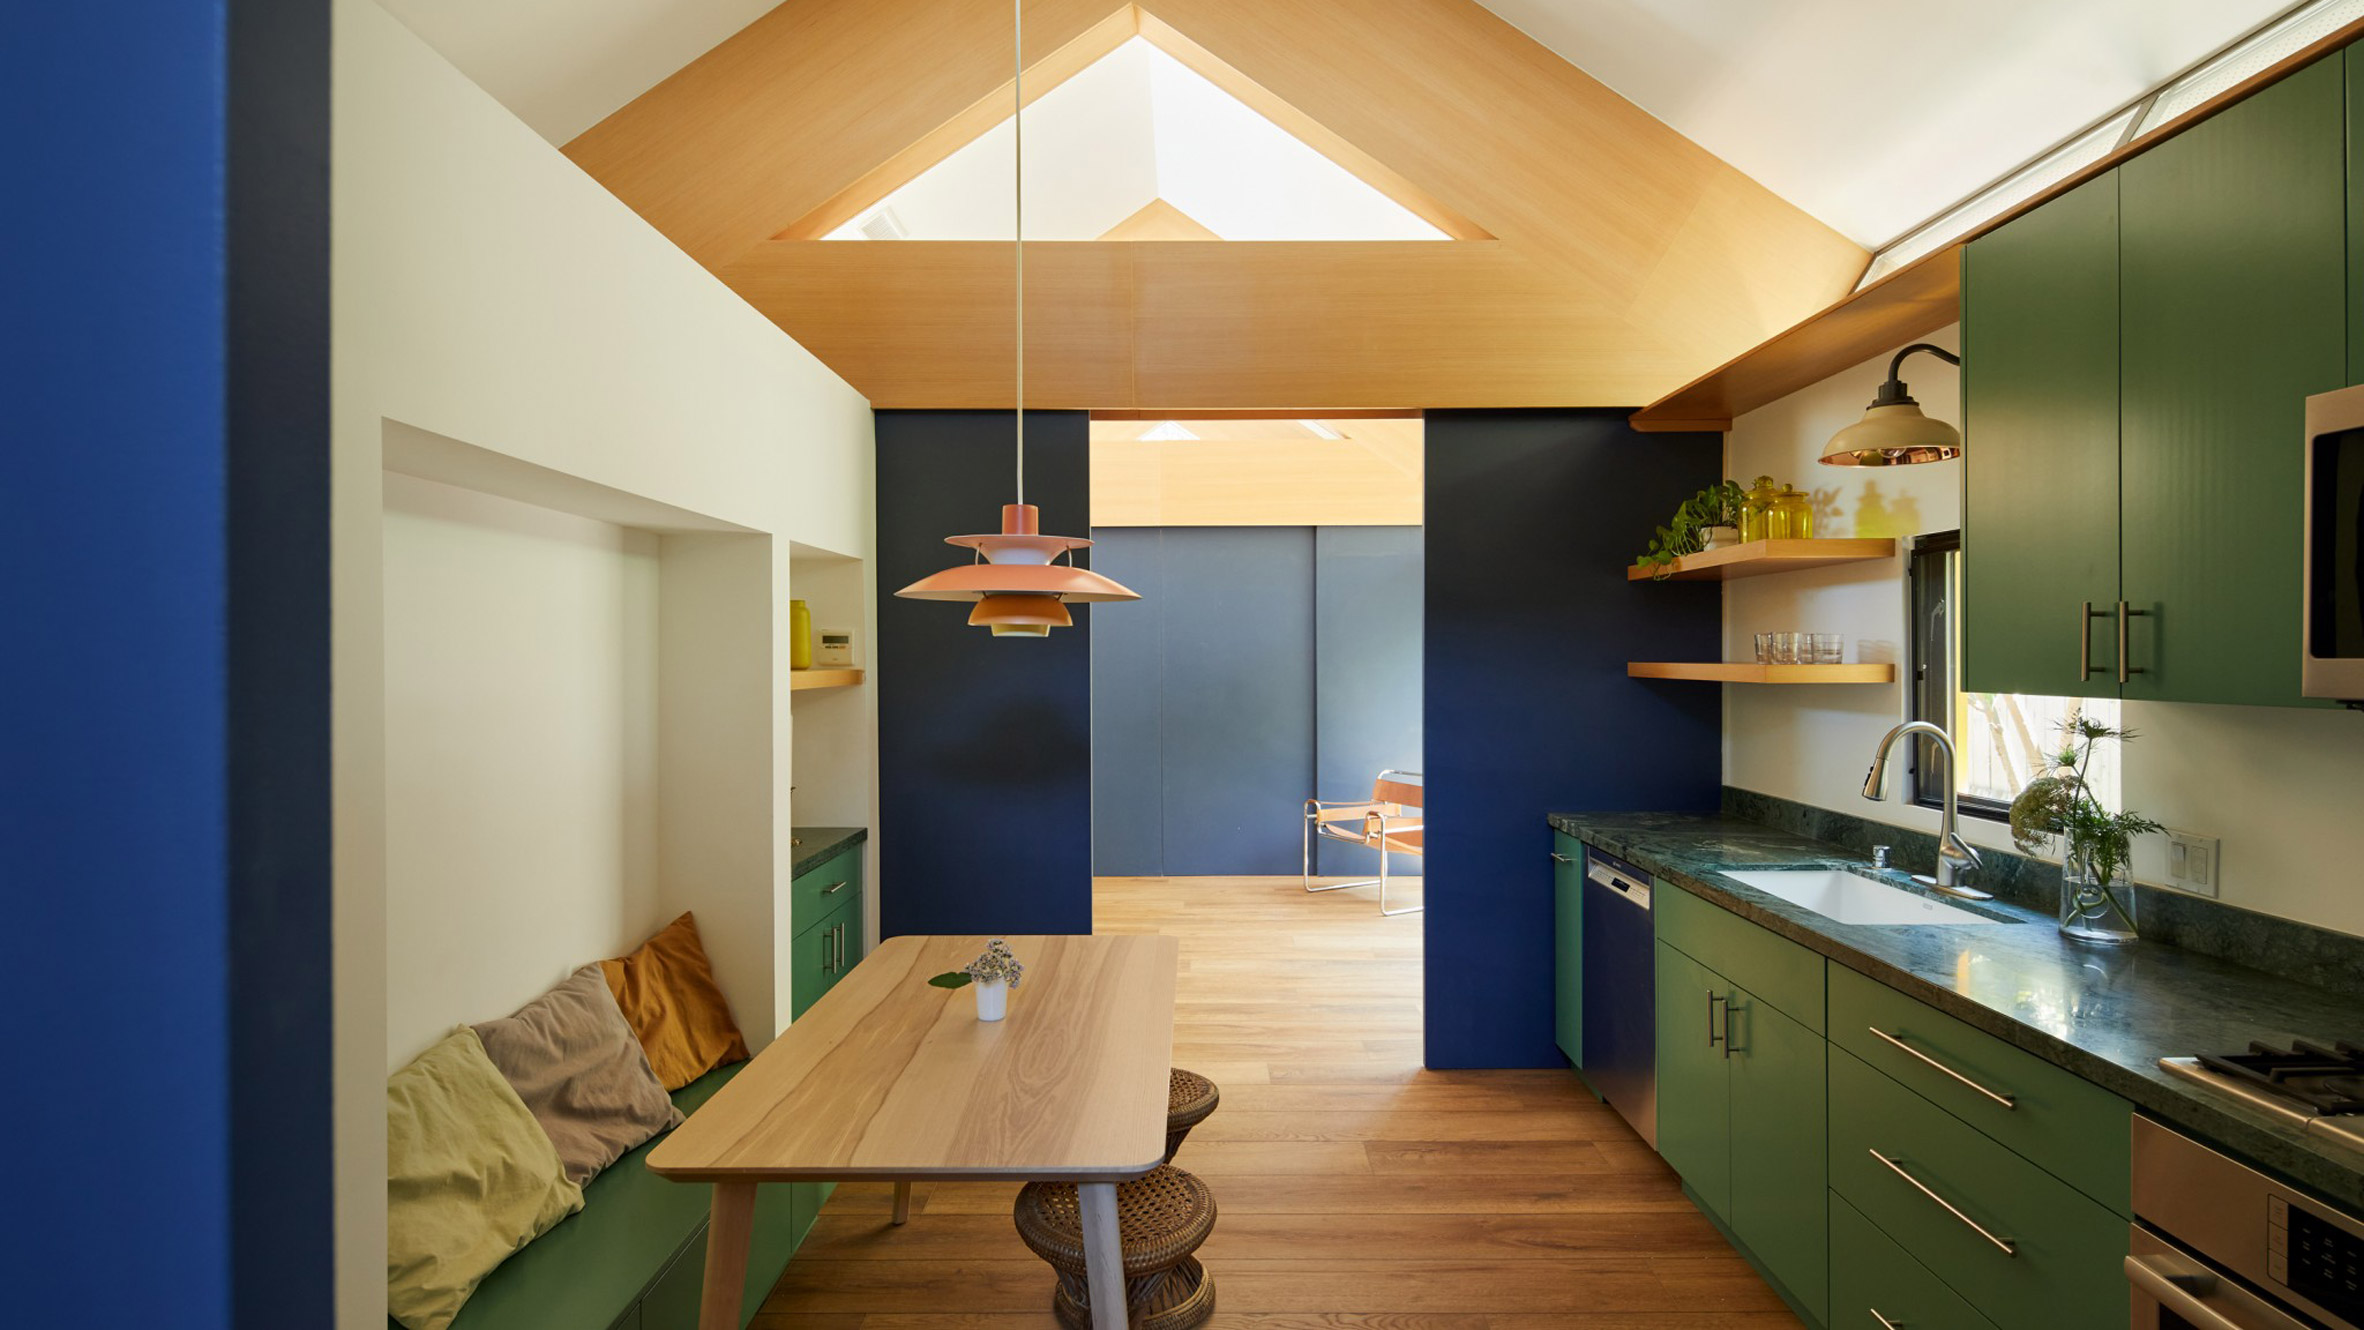 Bunch Design adds colourful granny flat to a home in Los Angeles